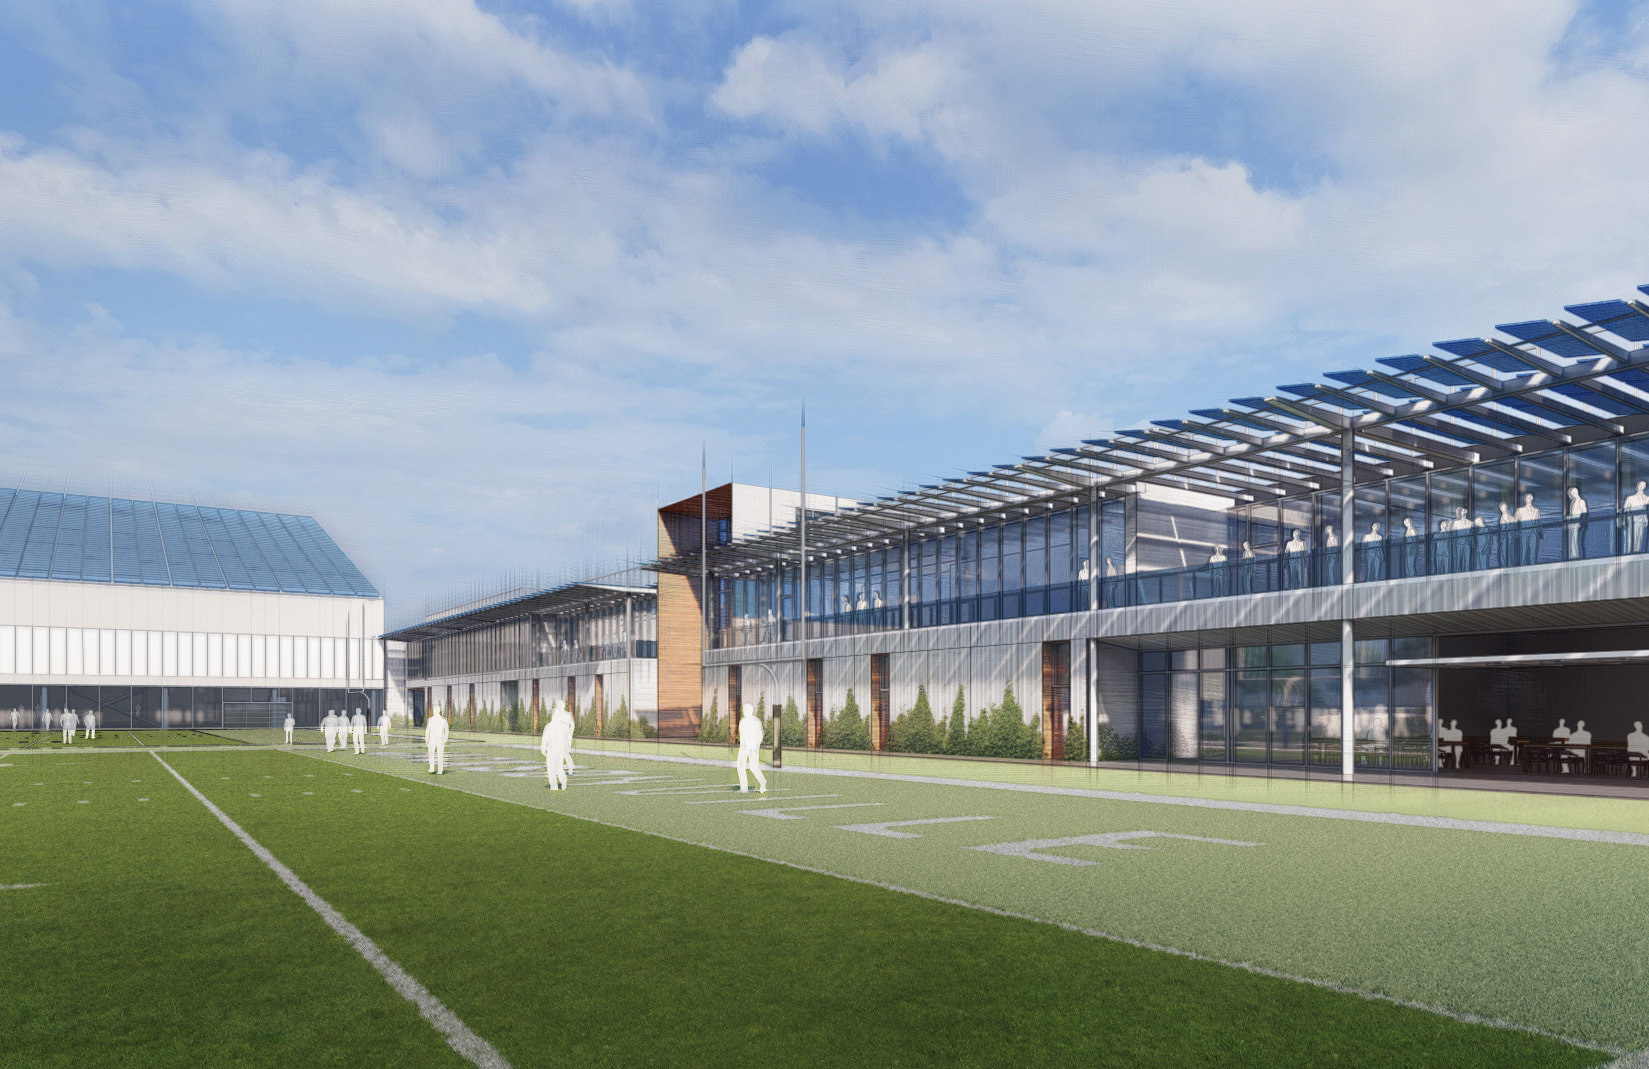 The facility includes two outdoor practice fields.